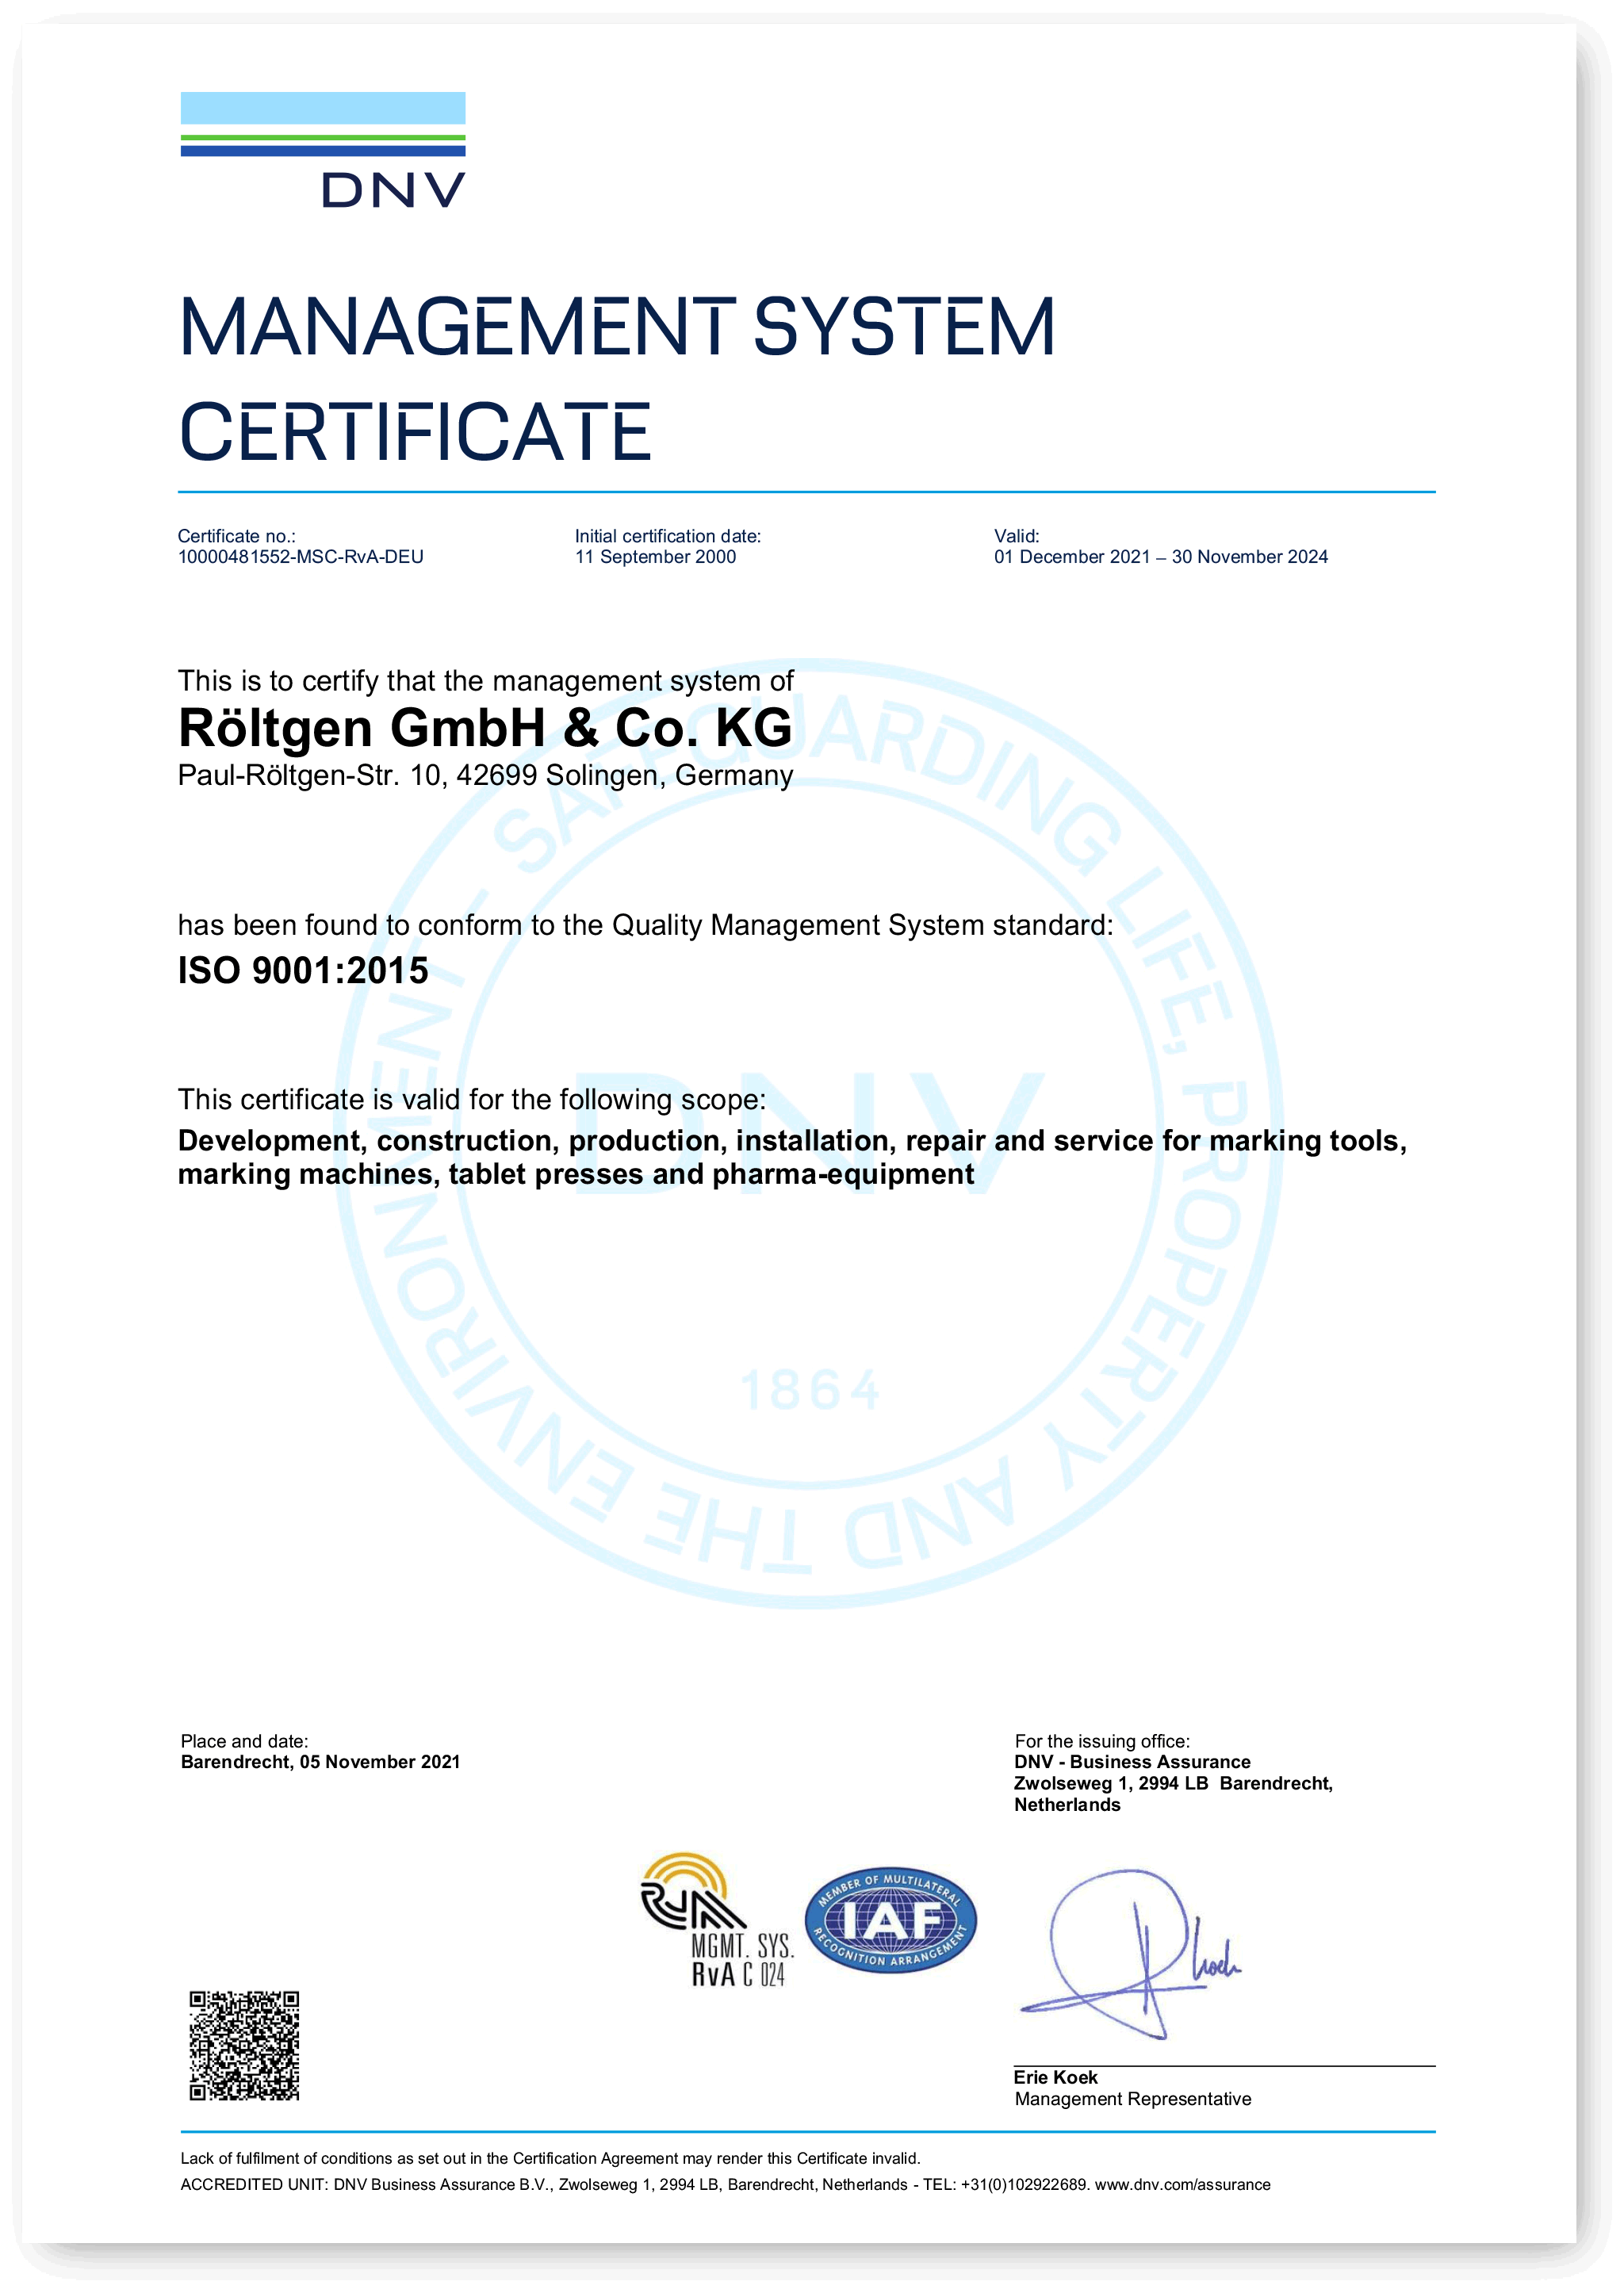 ISO 9100:2015